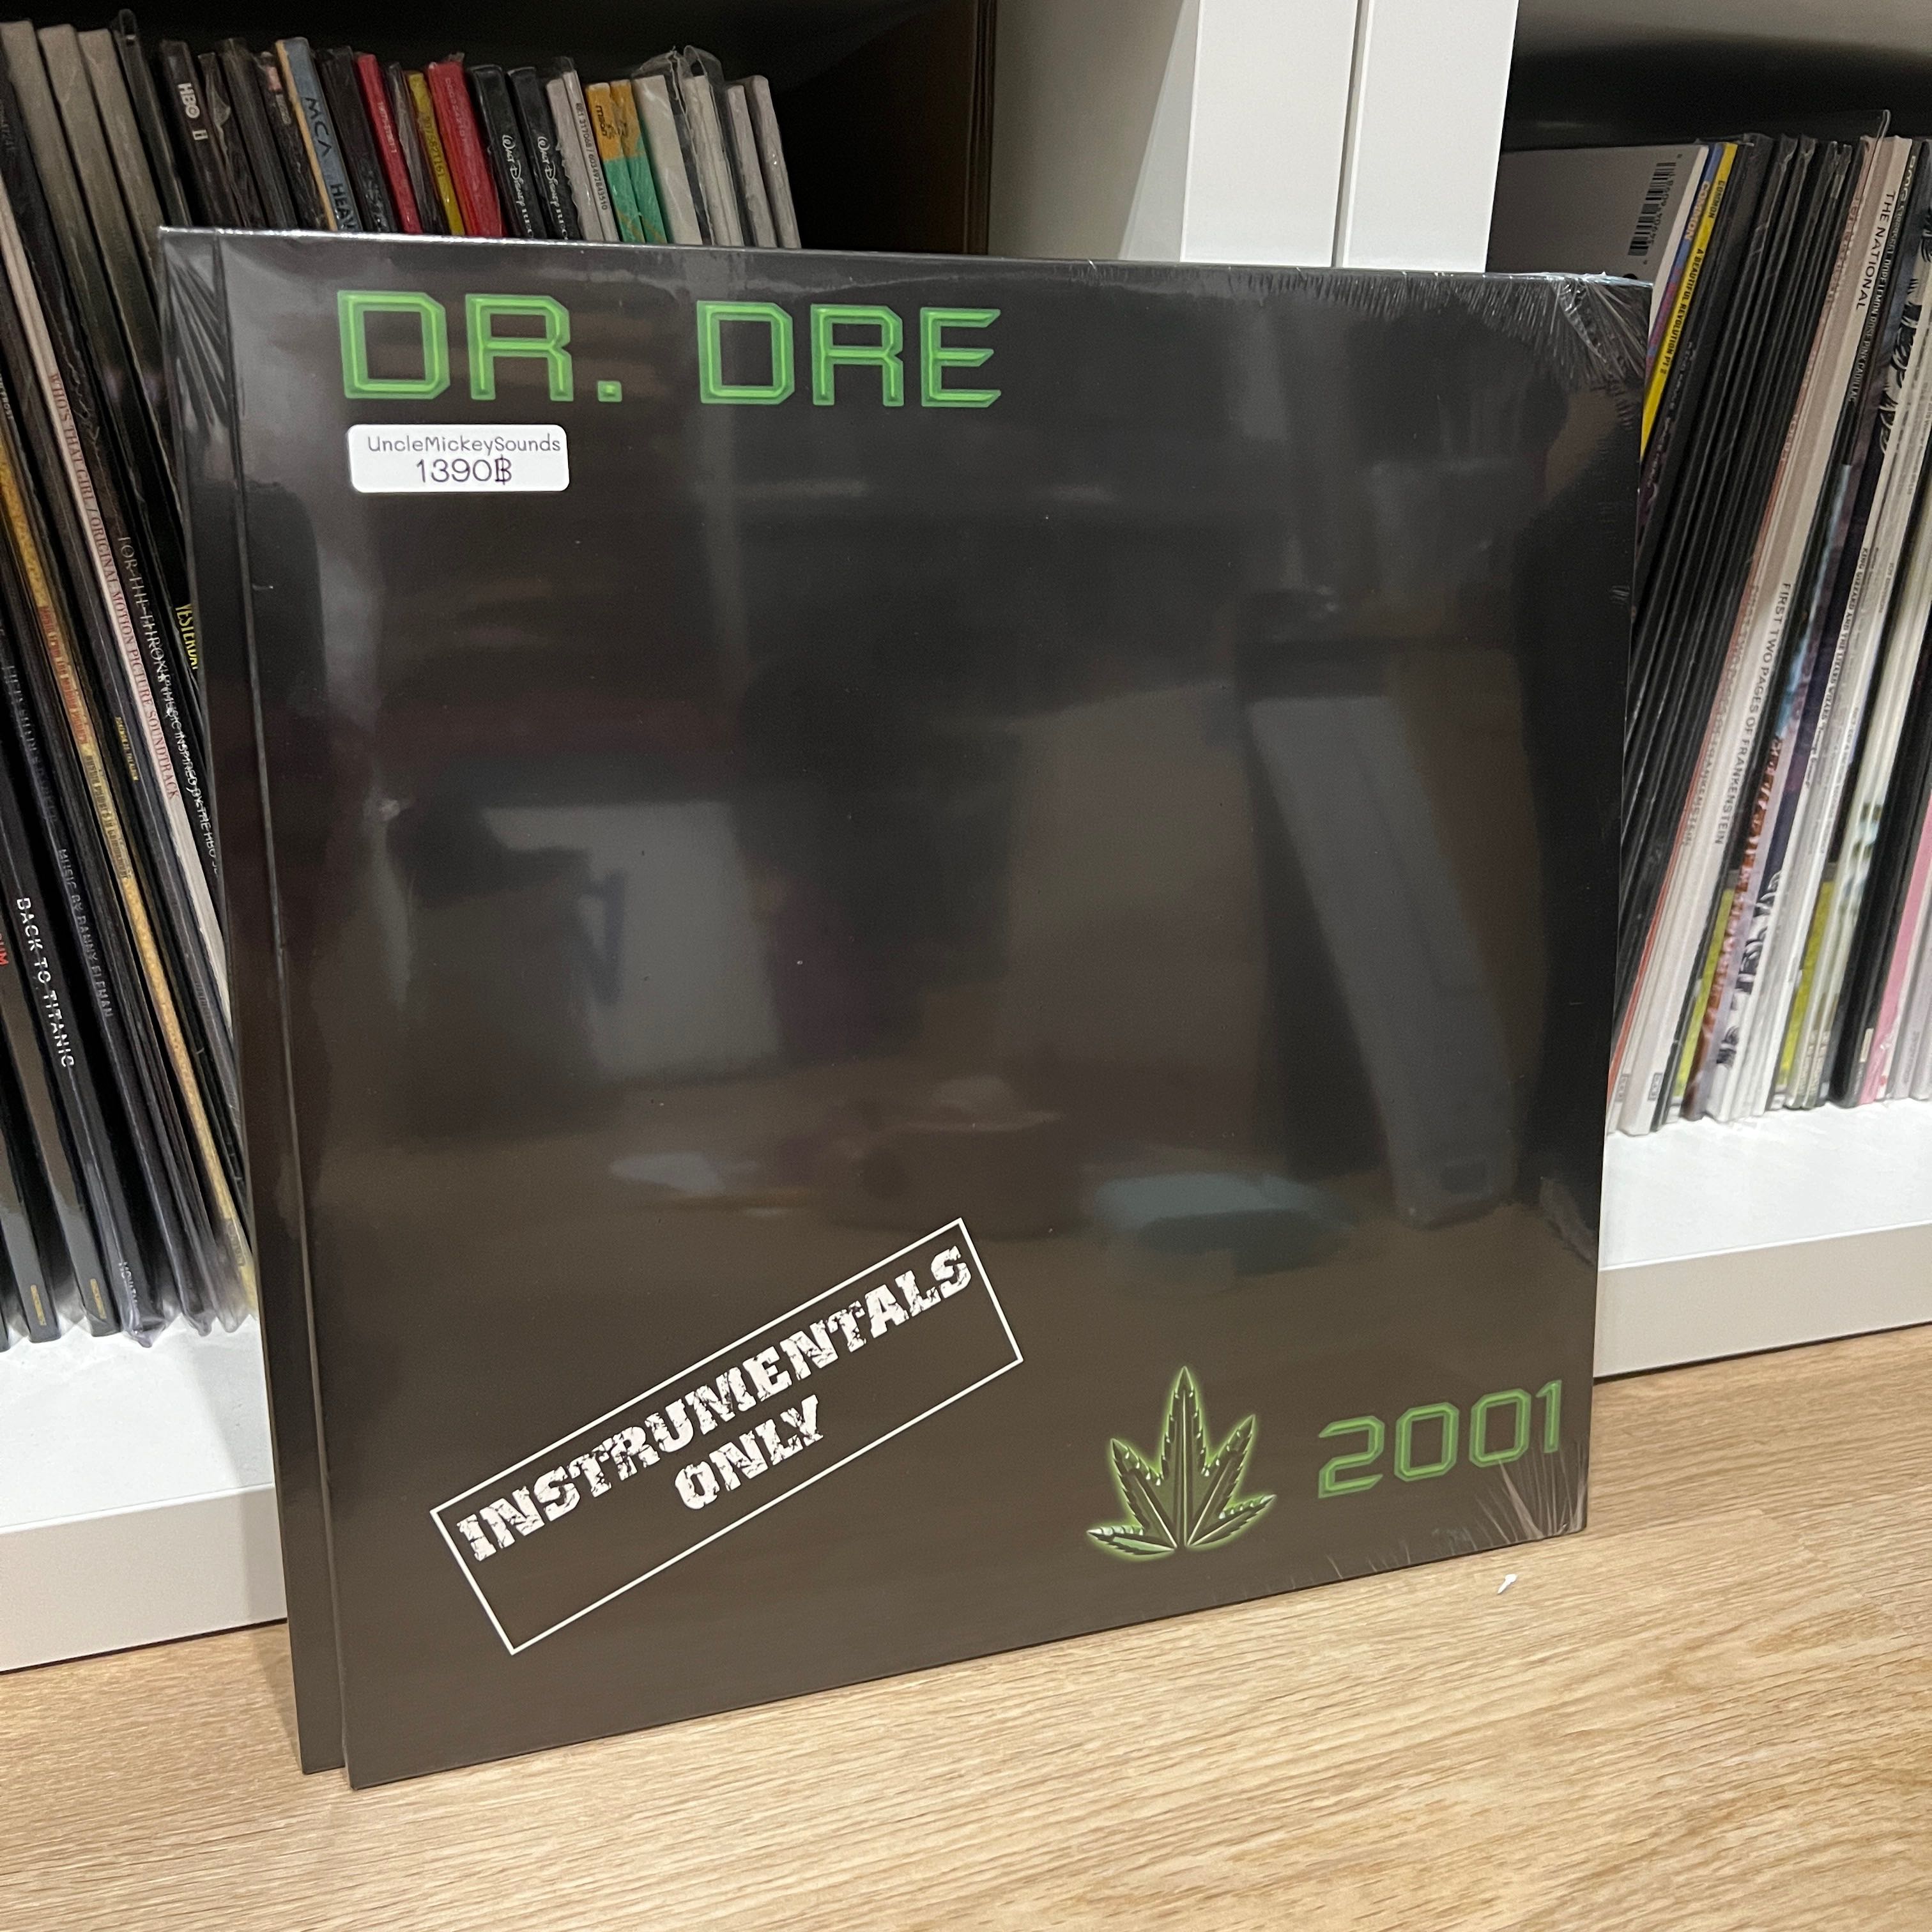 2001 (2019 Reissue) by Dr. Dre 